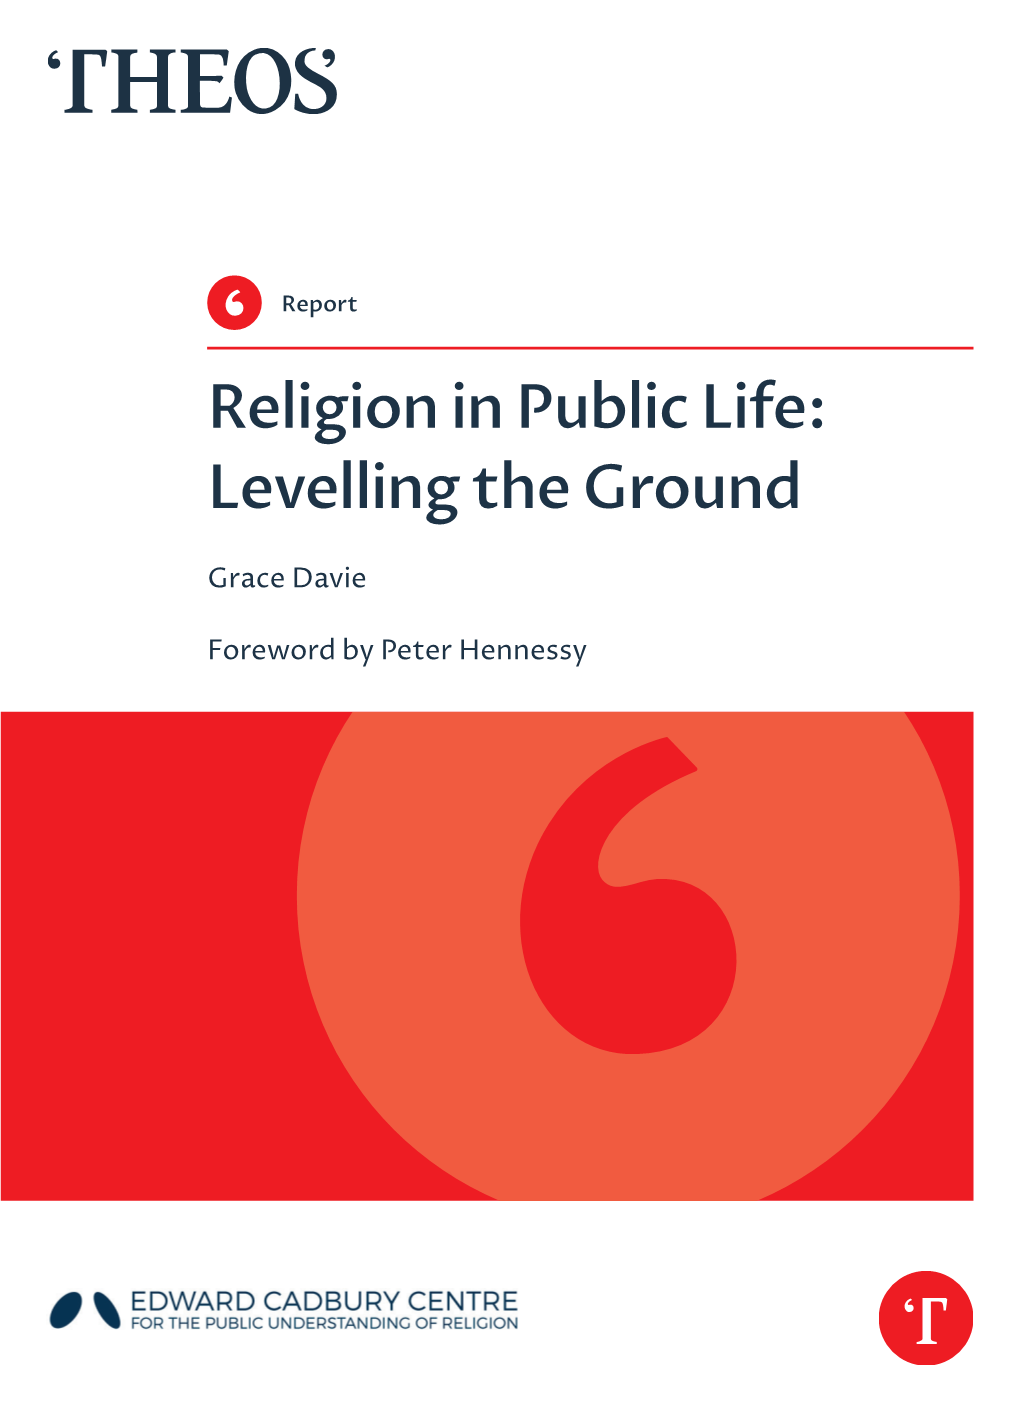 Religion in Public Life: Levelling the Ground